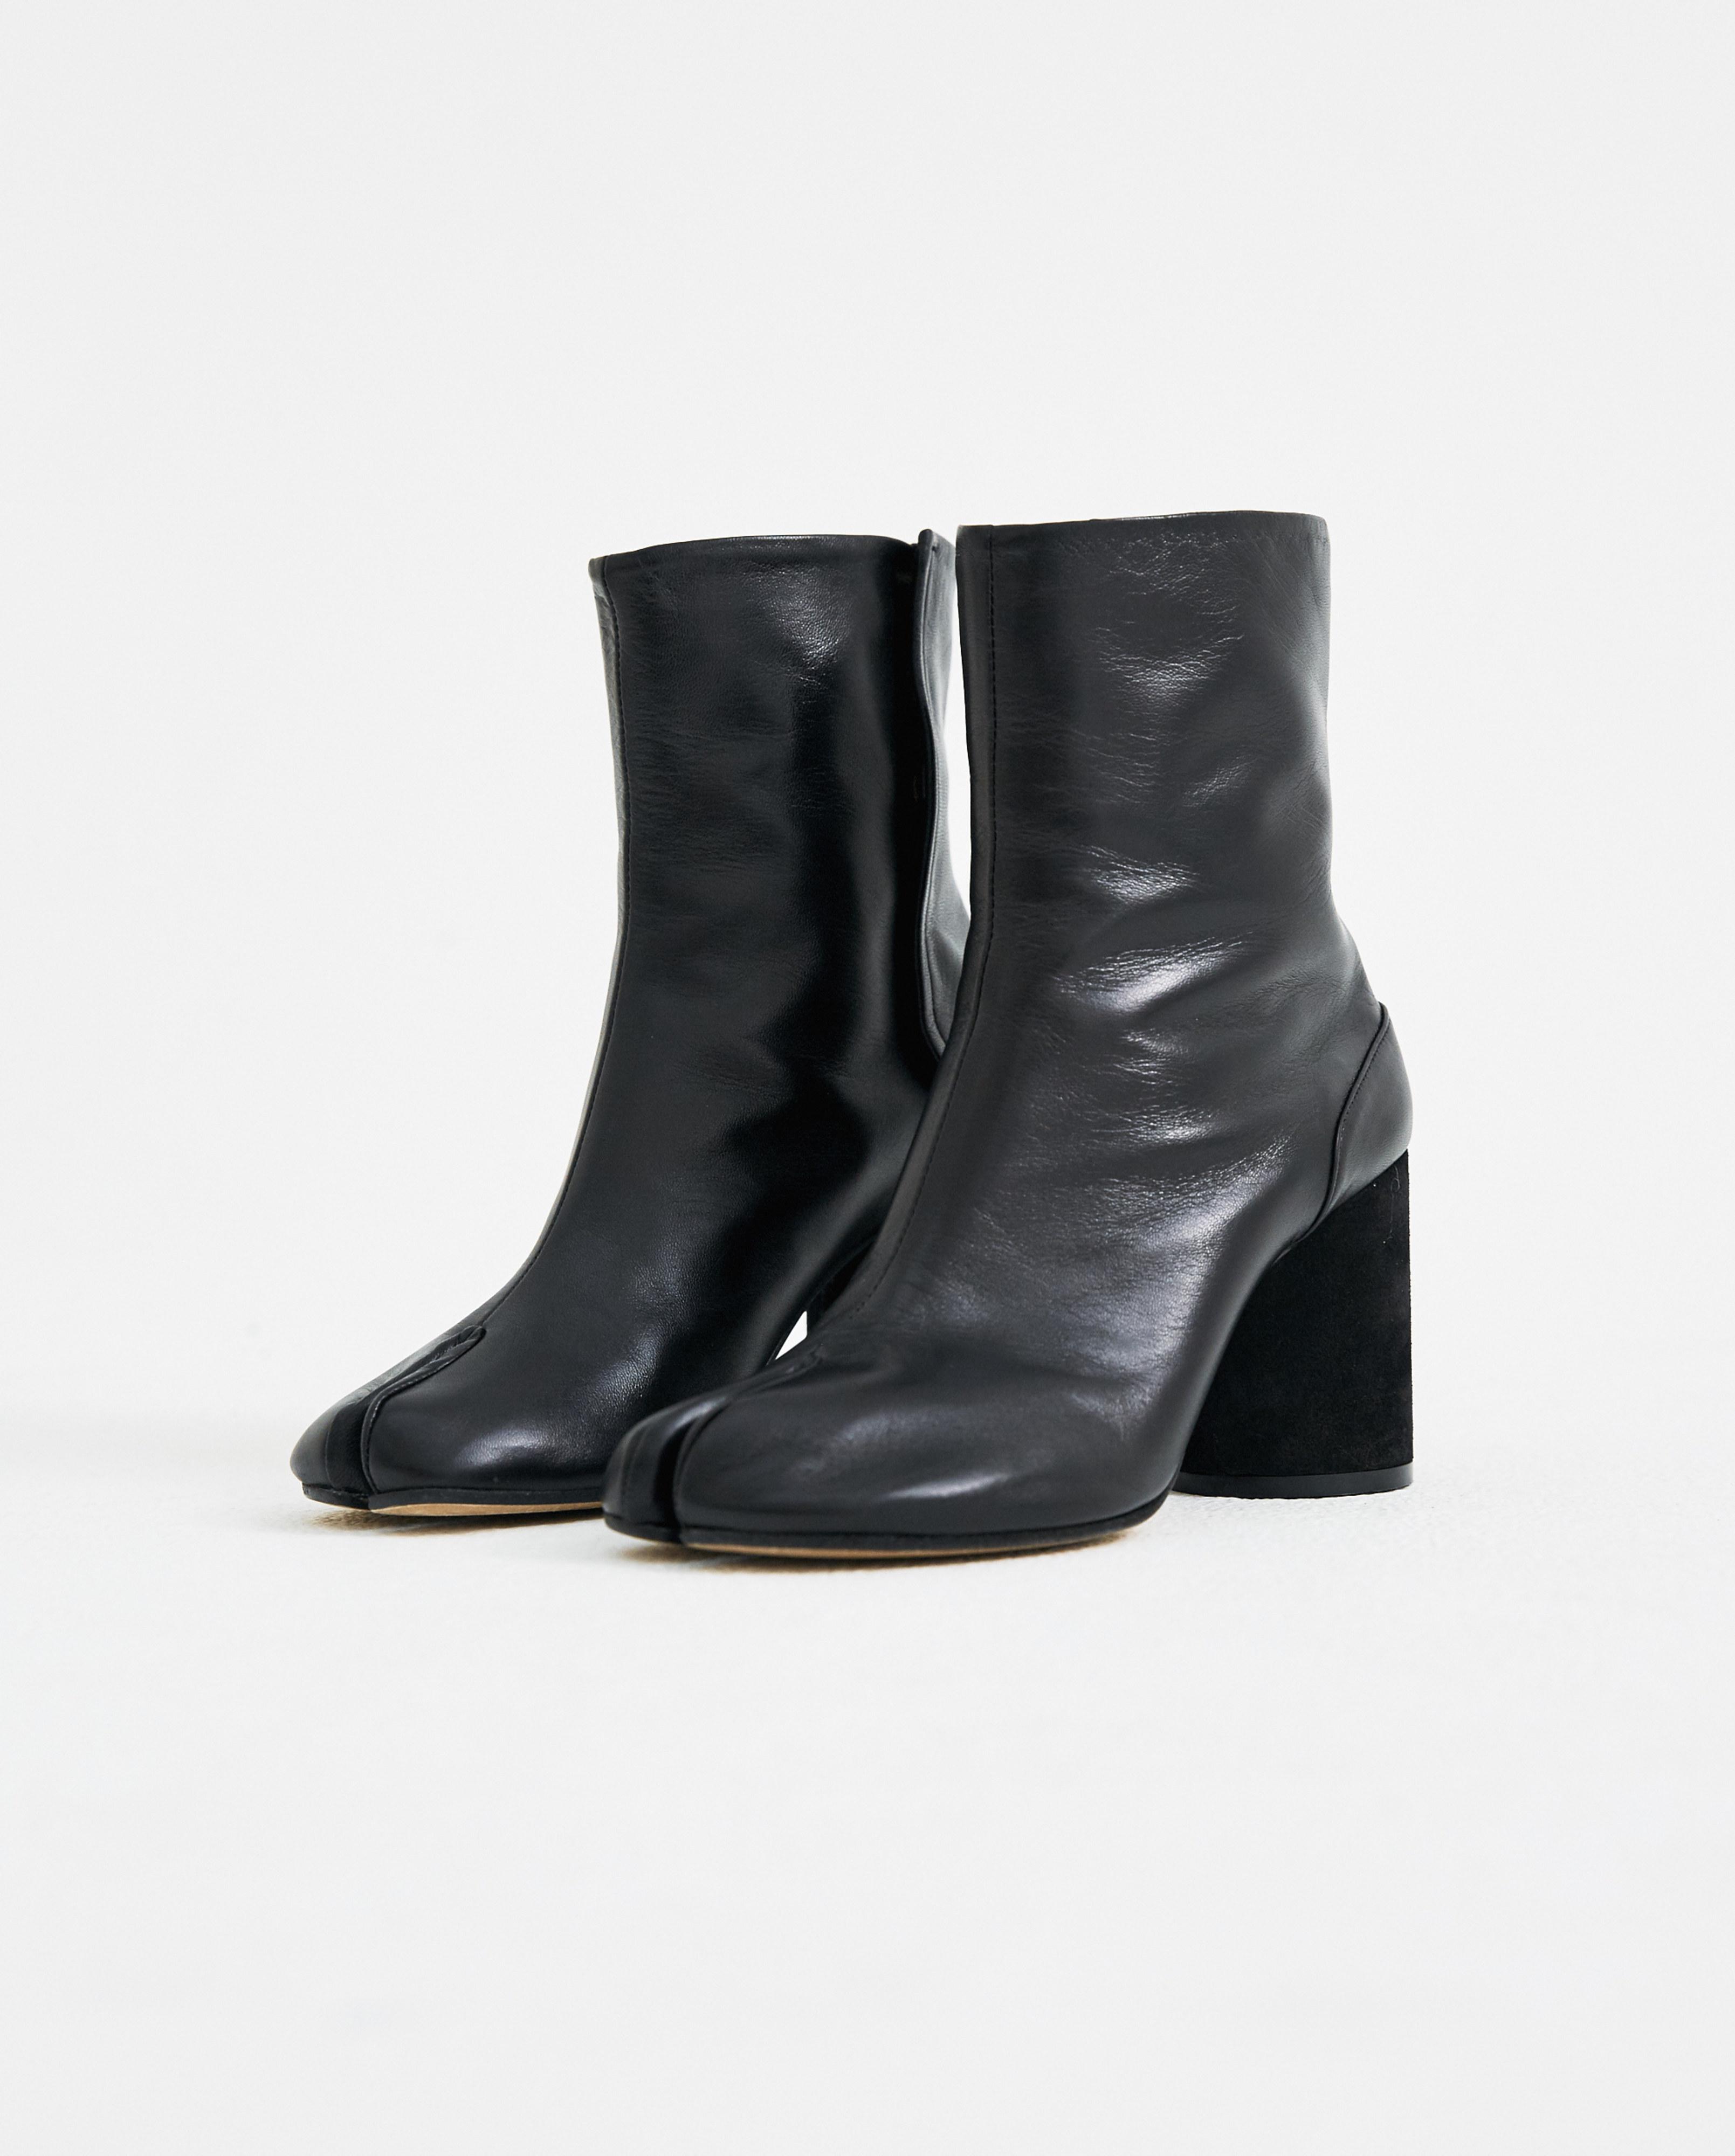 Lyst - Maison Margiela Black Tabi Ankle Boots With Gold Interior in Black